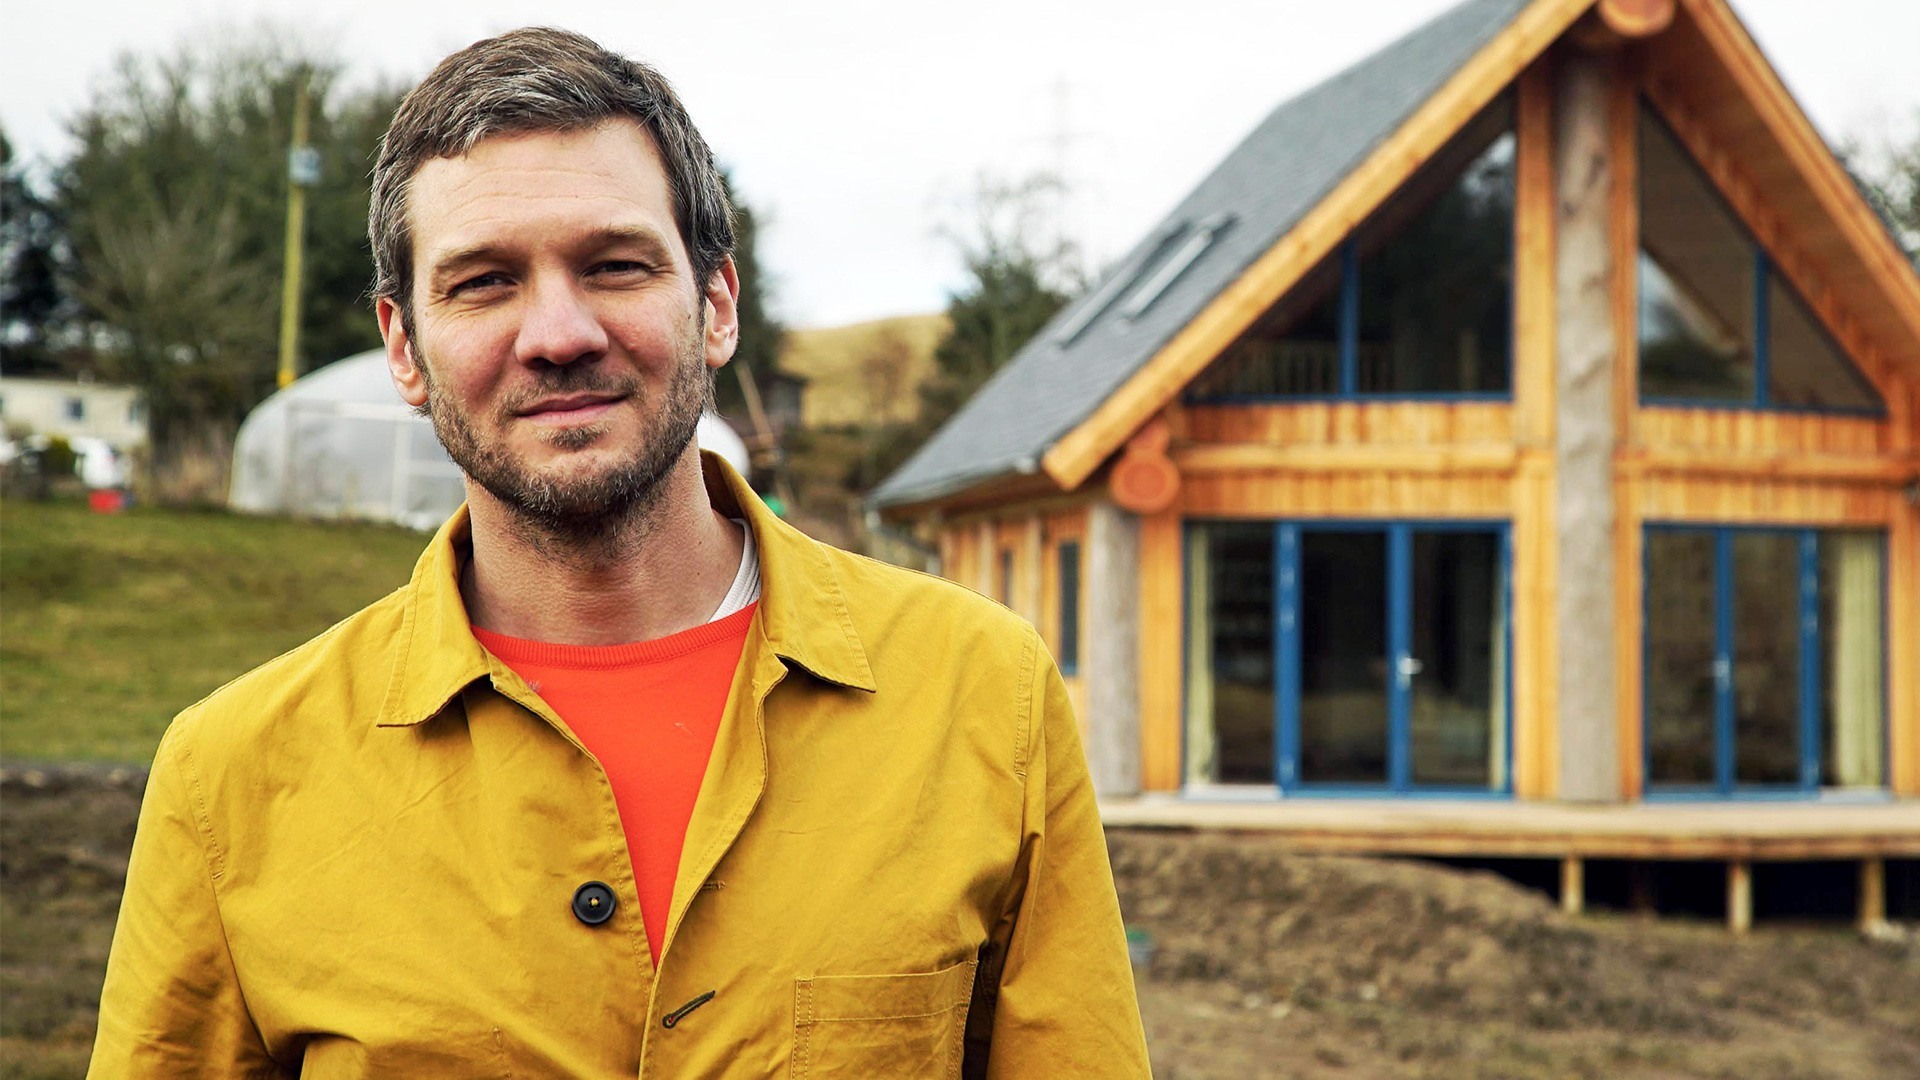 Architectural designer Charlie Luxton returns with Building the Dream